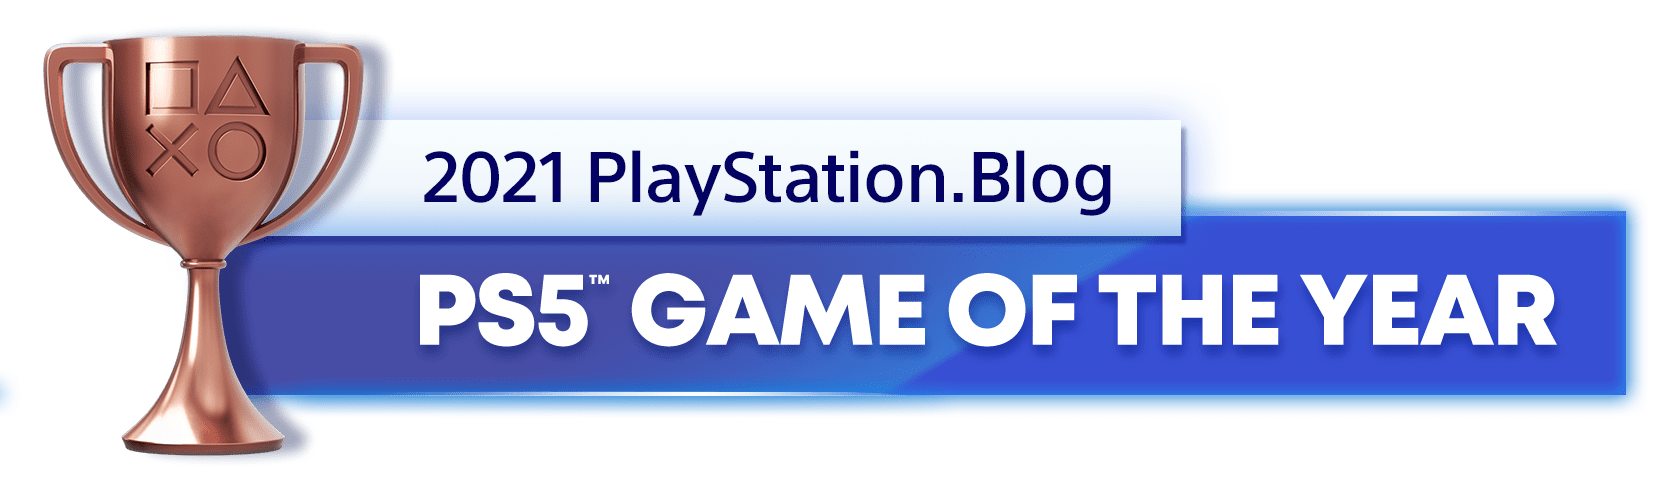 d43552b9a3ec478b4f71d5b42d3129cb3dd70953 - PS.Blog: Gewinner der Game of the Year Awards 2021